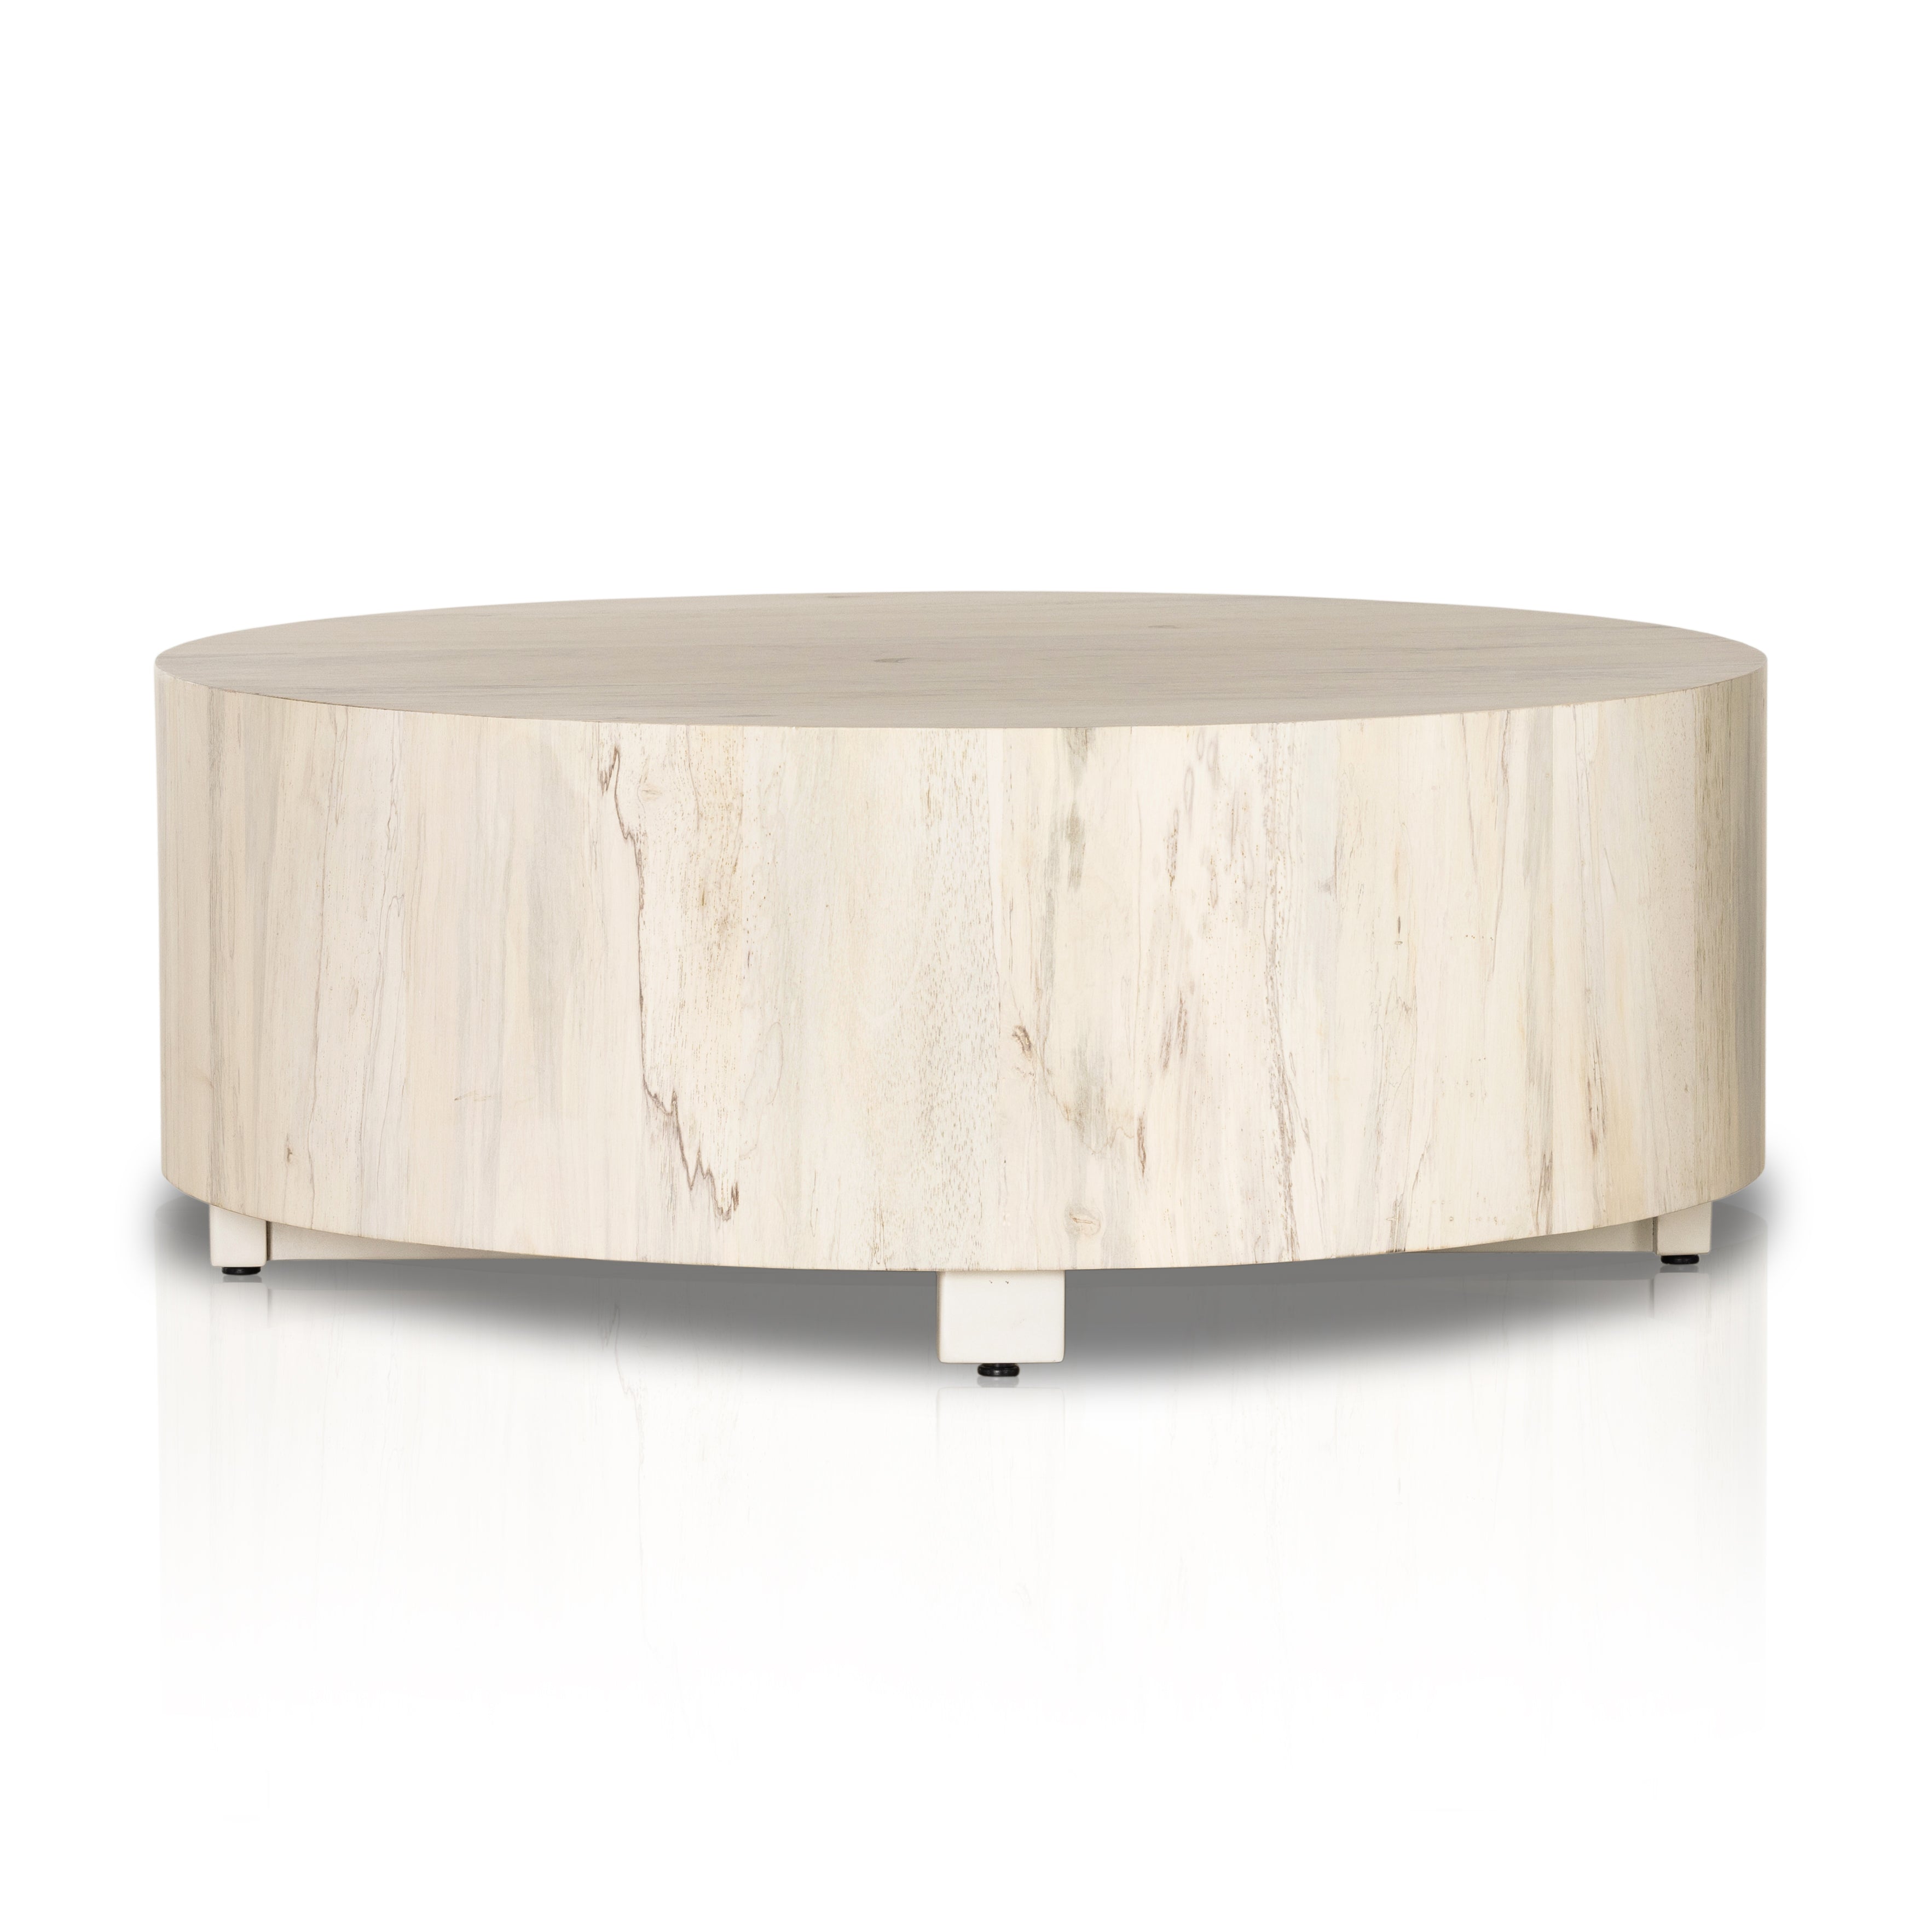 Stunning forces of nature are captured in a coffee table, as spalted primavera wood is hand-shaped into a cylindrical silhouette and finished in a white hue. Reflective of woods' natural character, a slight color variance is possible. Amethyst Home provides interior design, new construction, custom furniture, and area rugs in the Austin metro area.